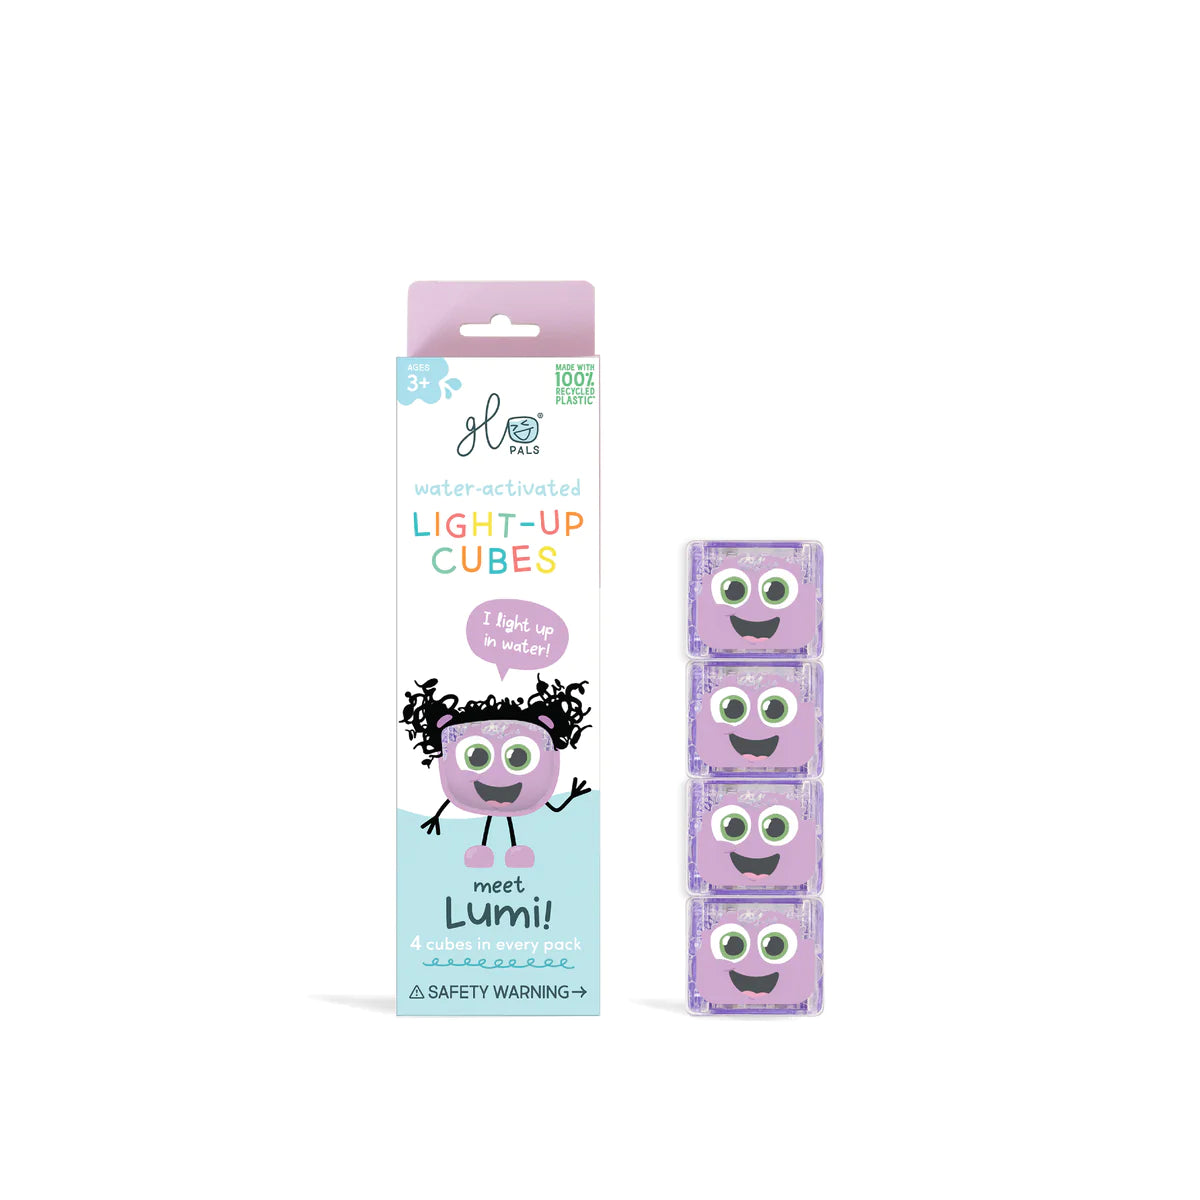 Lumi Light Up Cubes By Glo Pals